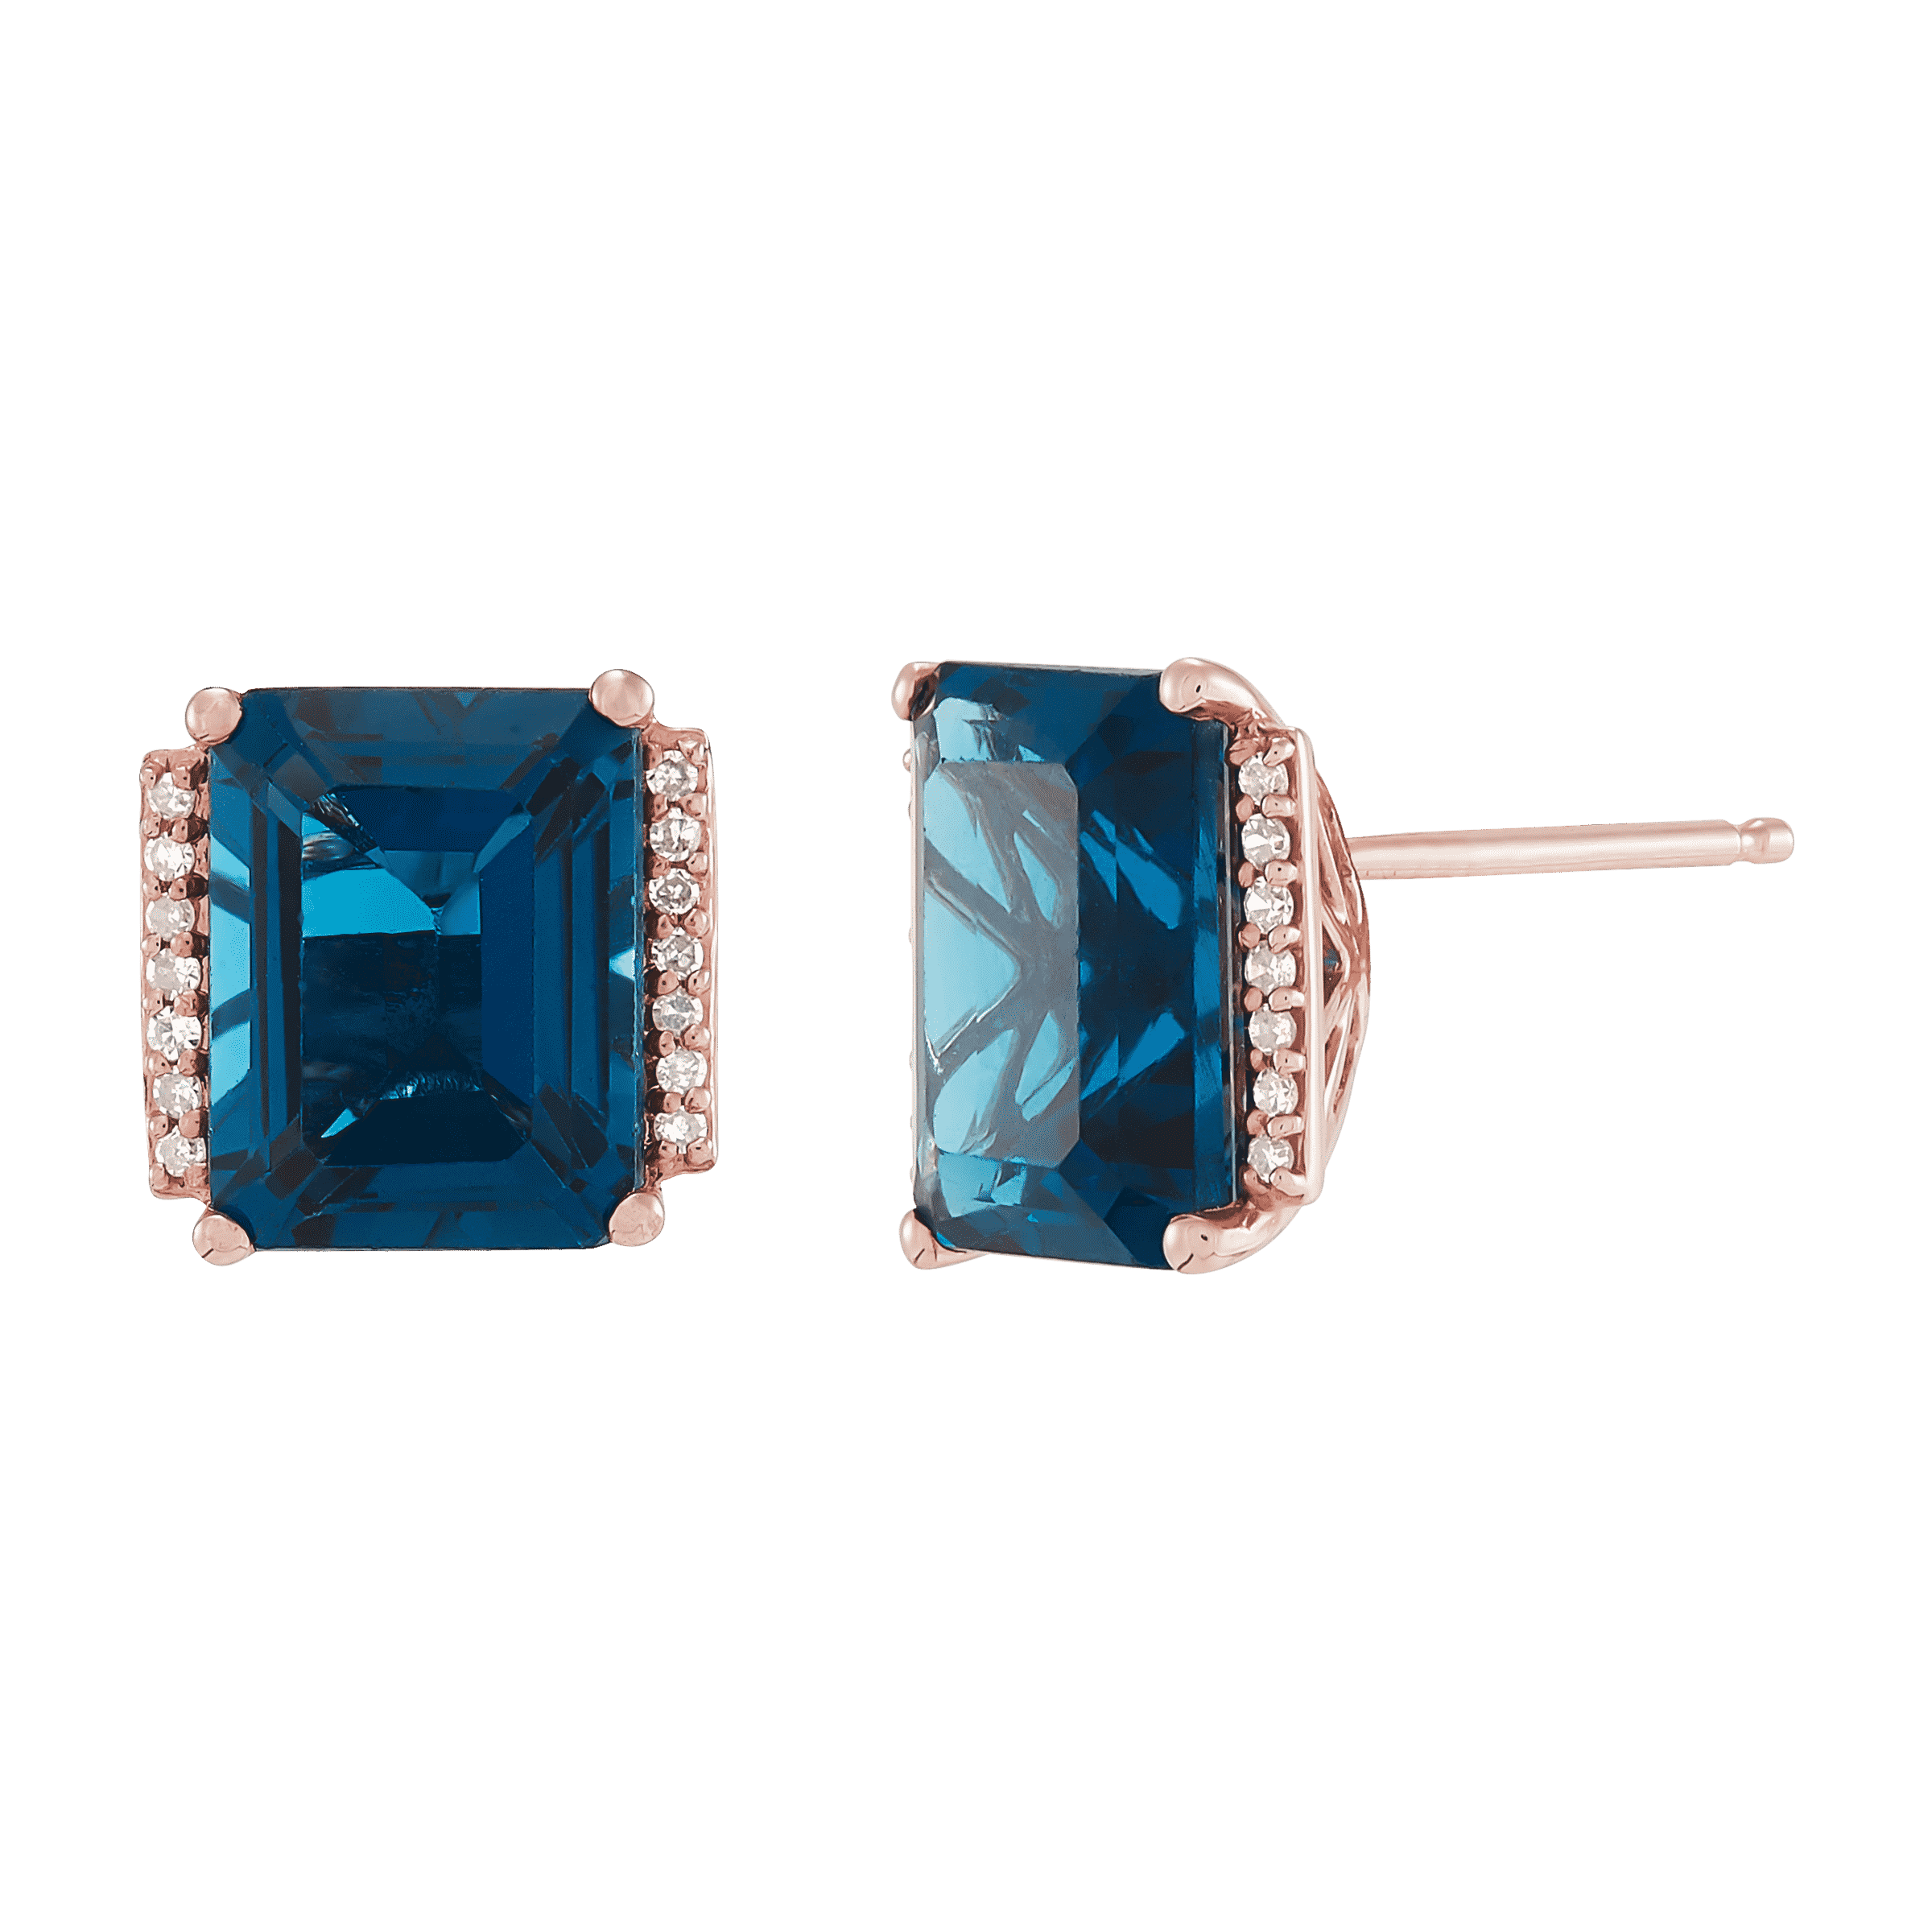 Pre-owned Welry Natural London Blue Topaz Stud Earrings With Diamonds In 10k Rose Gold